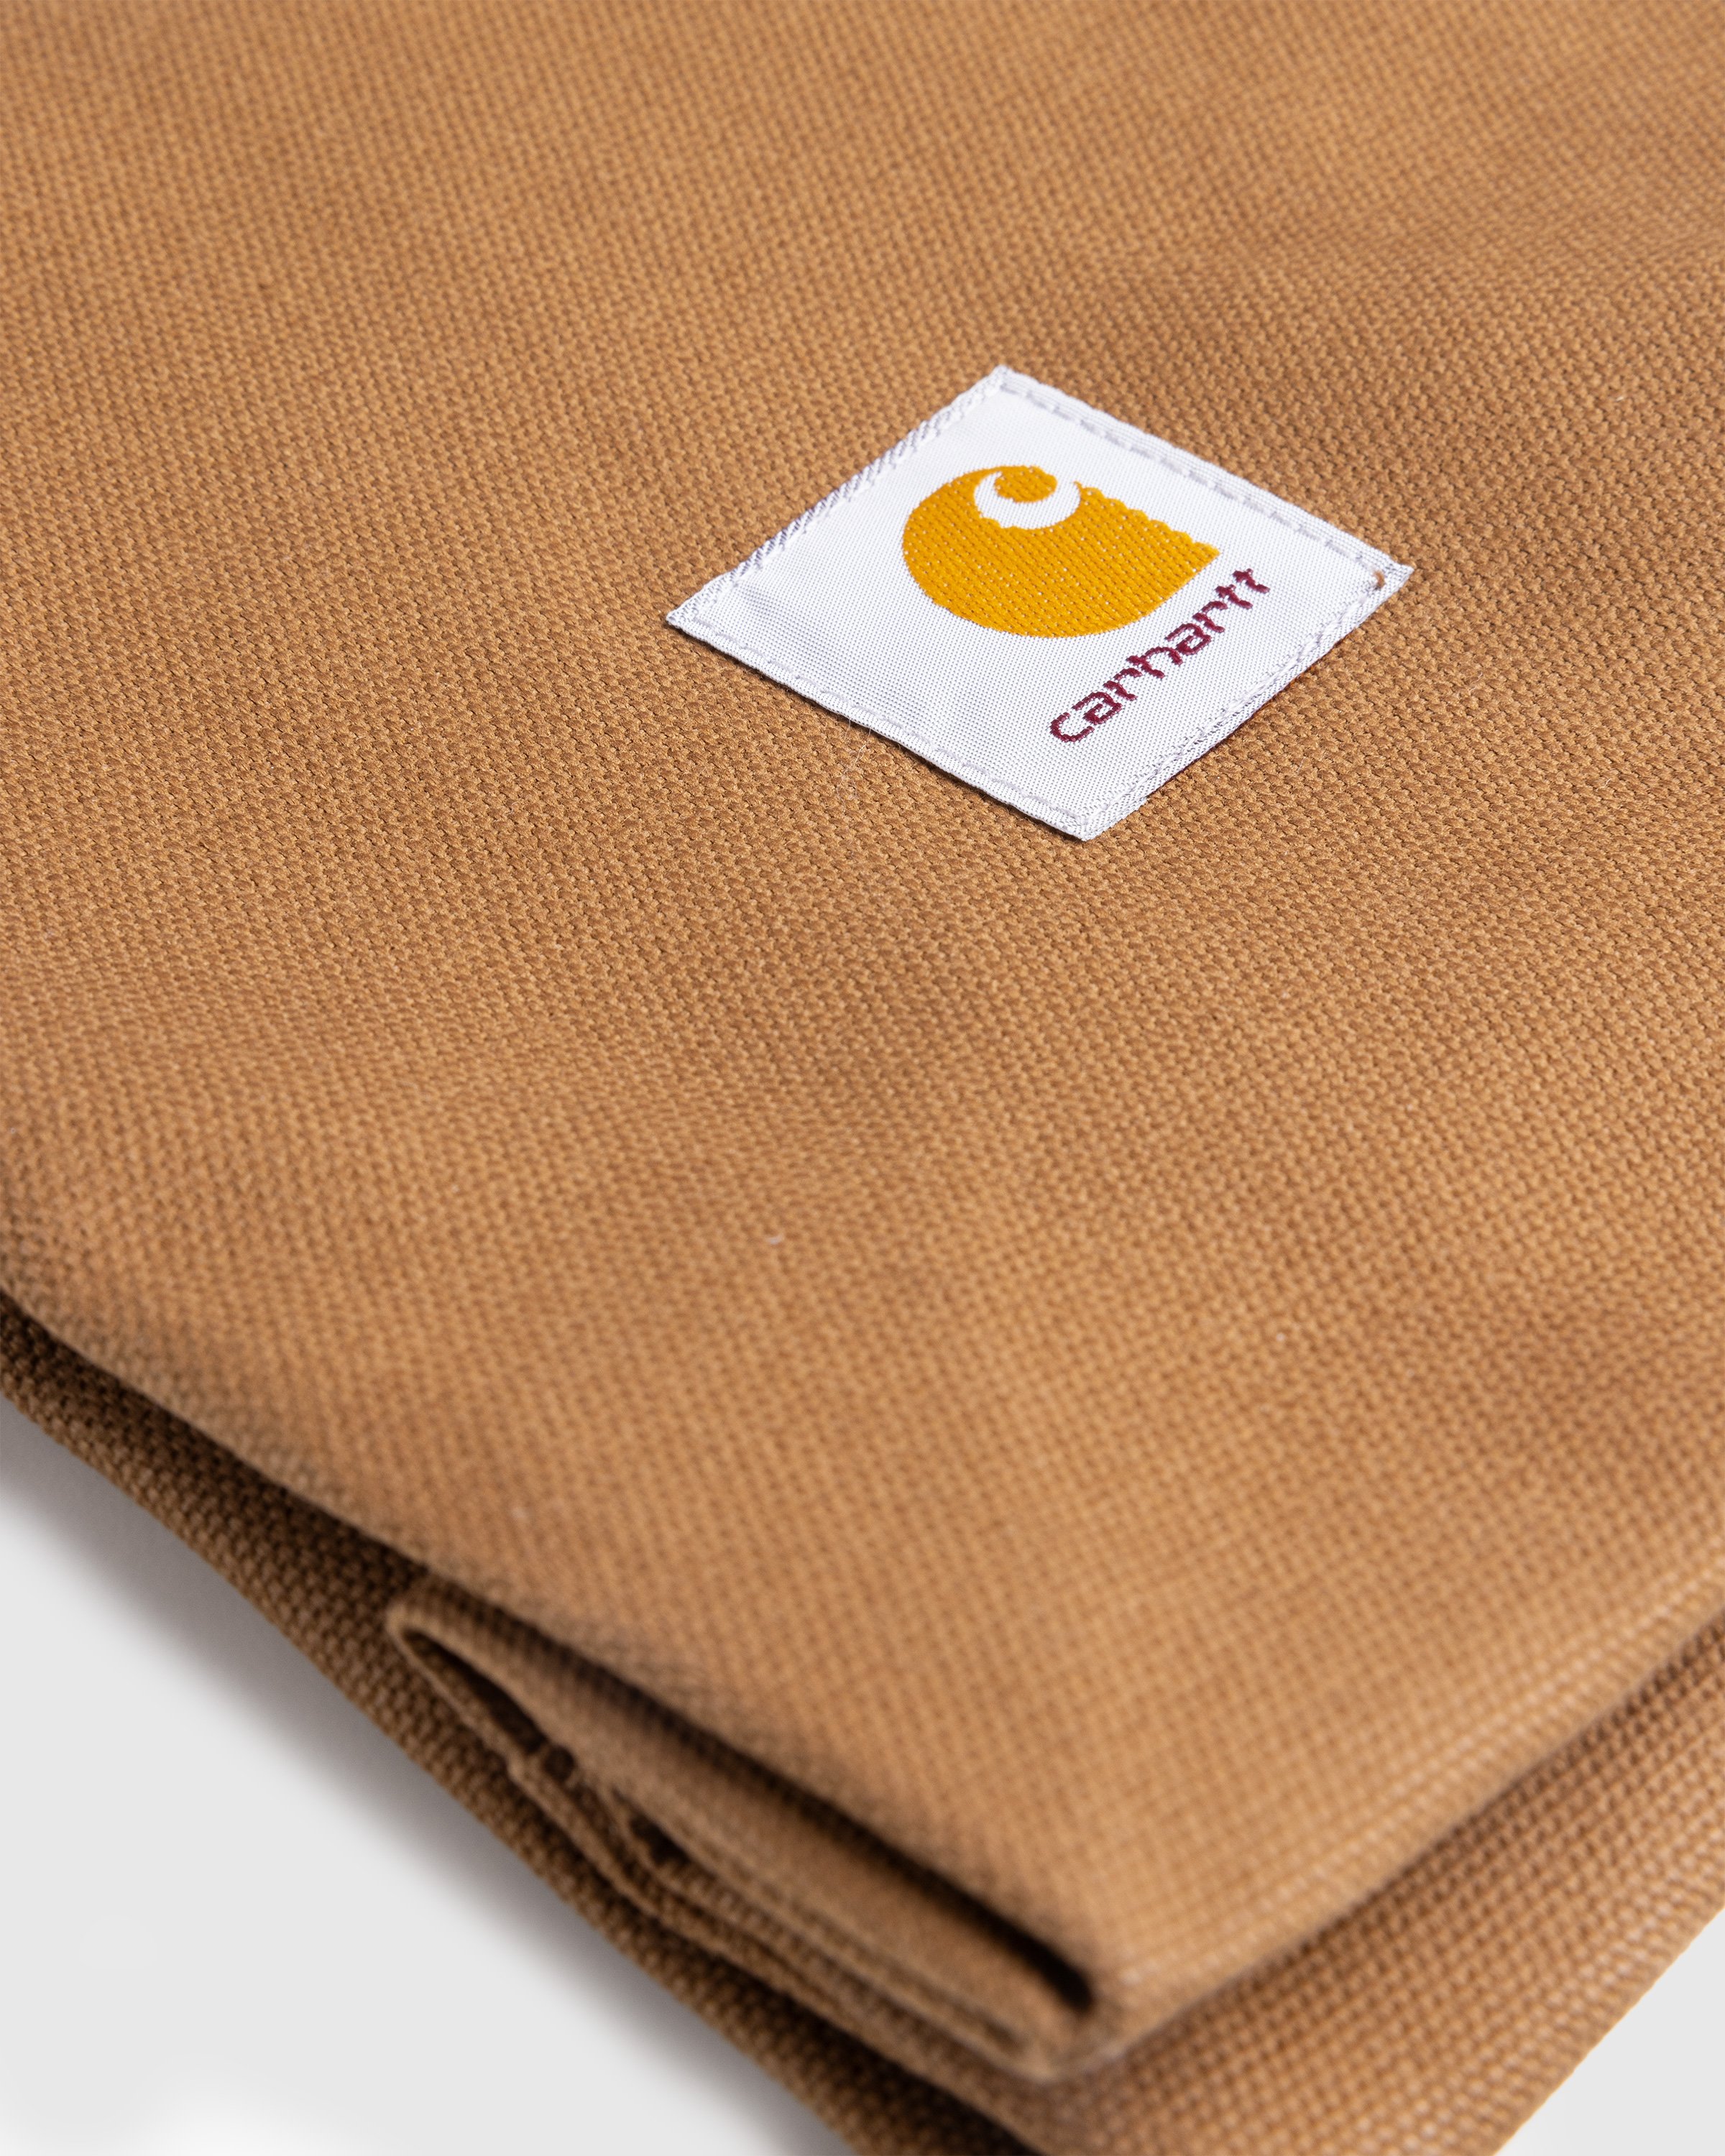 Carhartt WIP - Lunch Bag Hamilton Brown - Lifestyle - Brown - Image 5